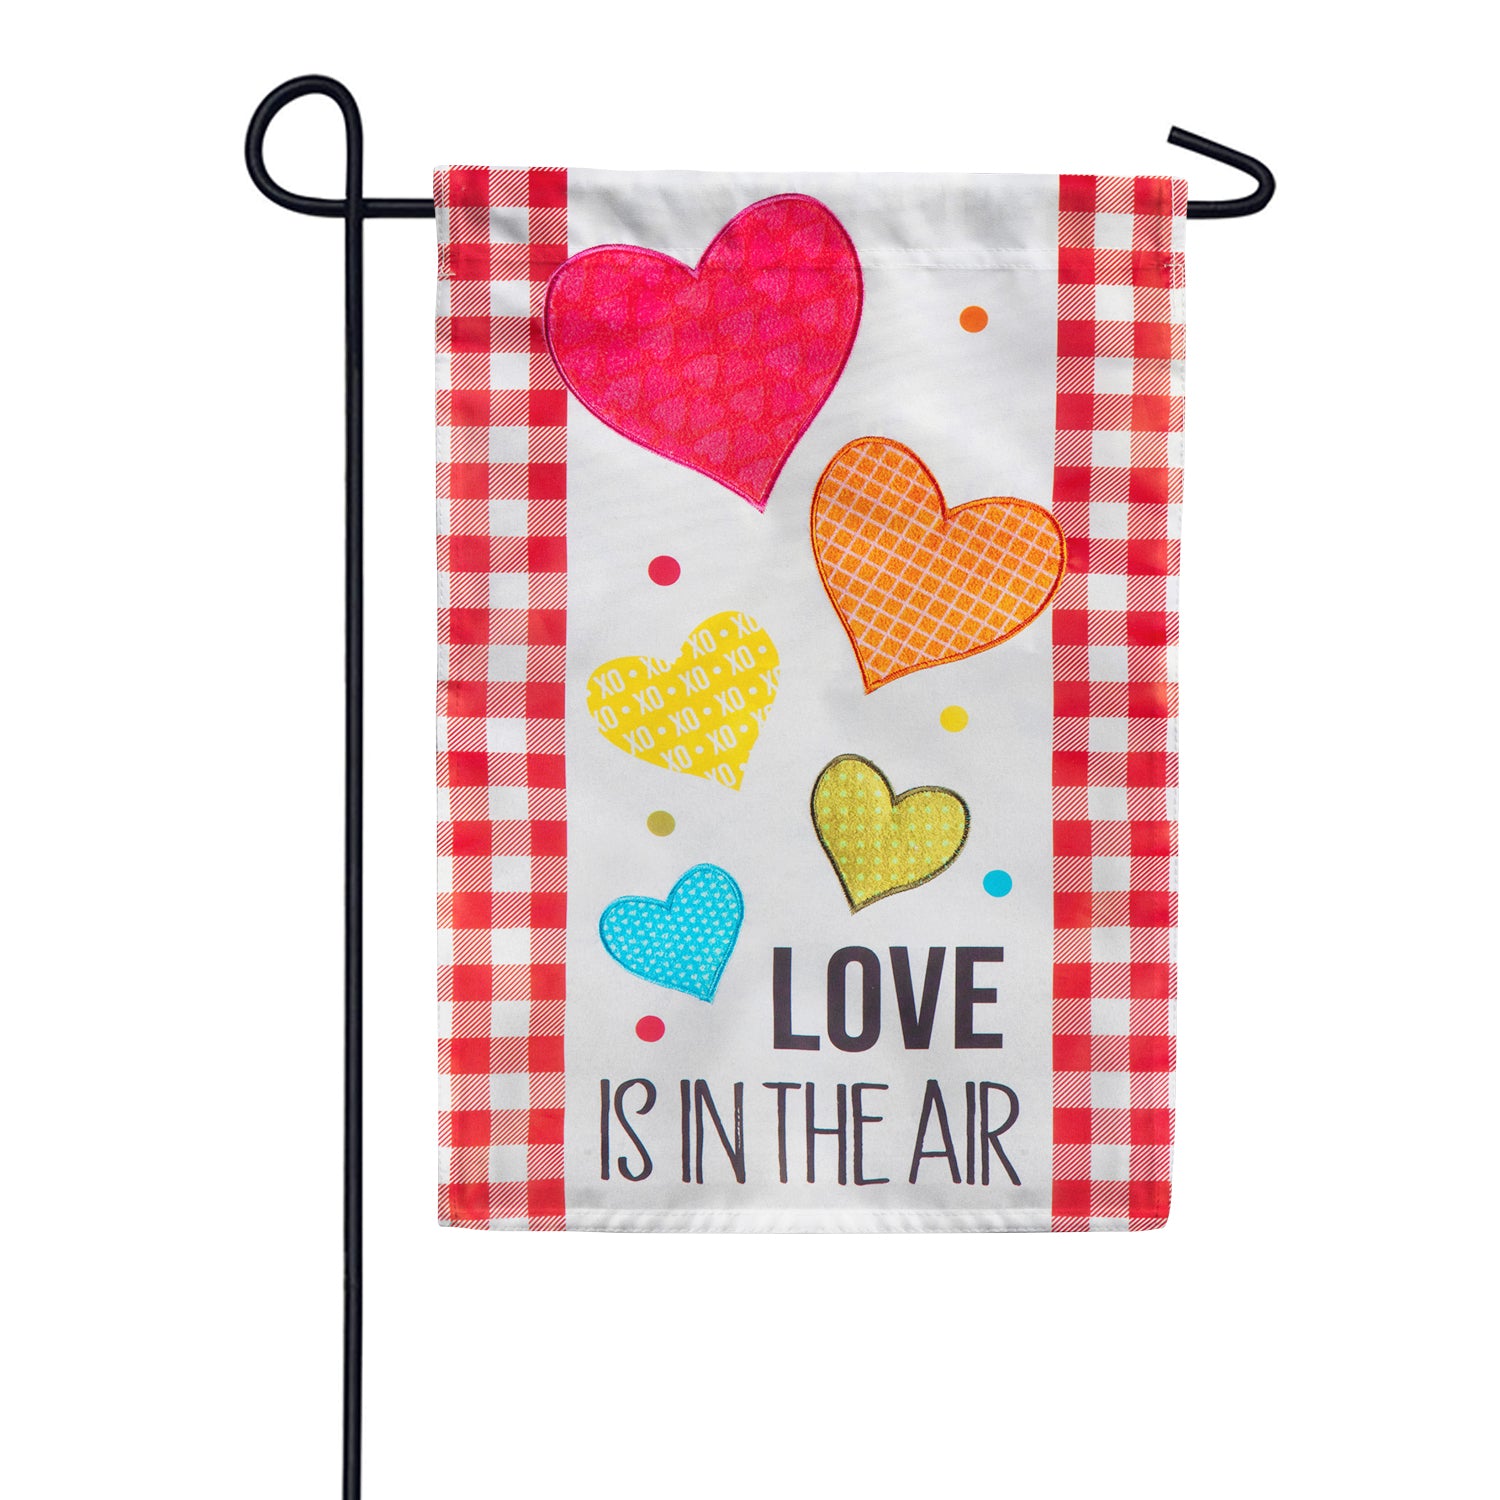 Love is in the Air Appliqued Garden Flag